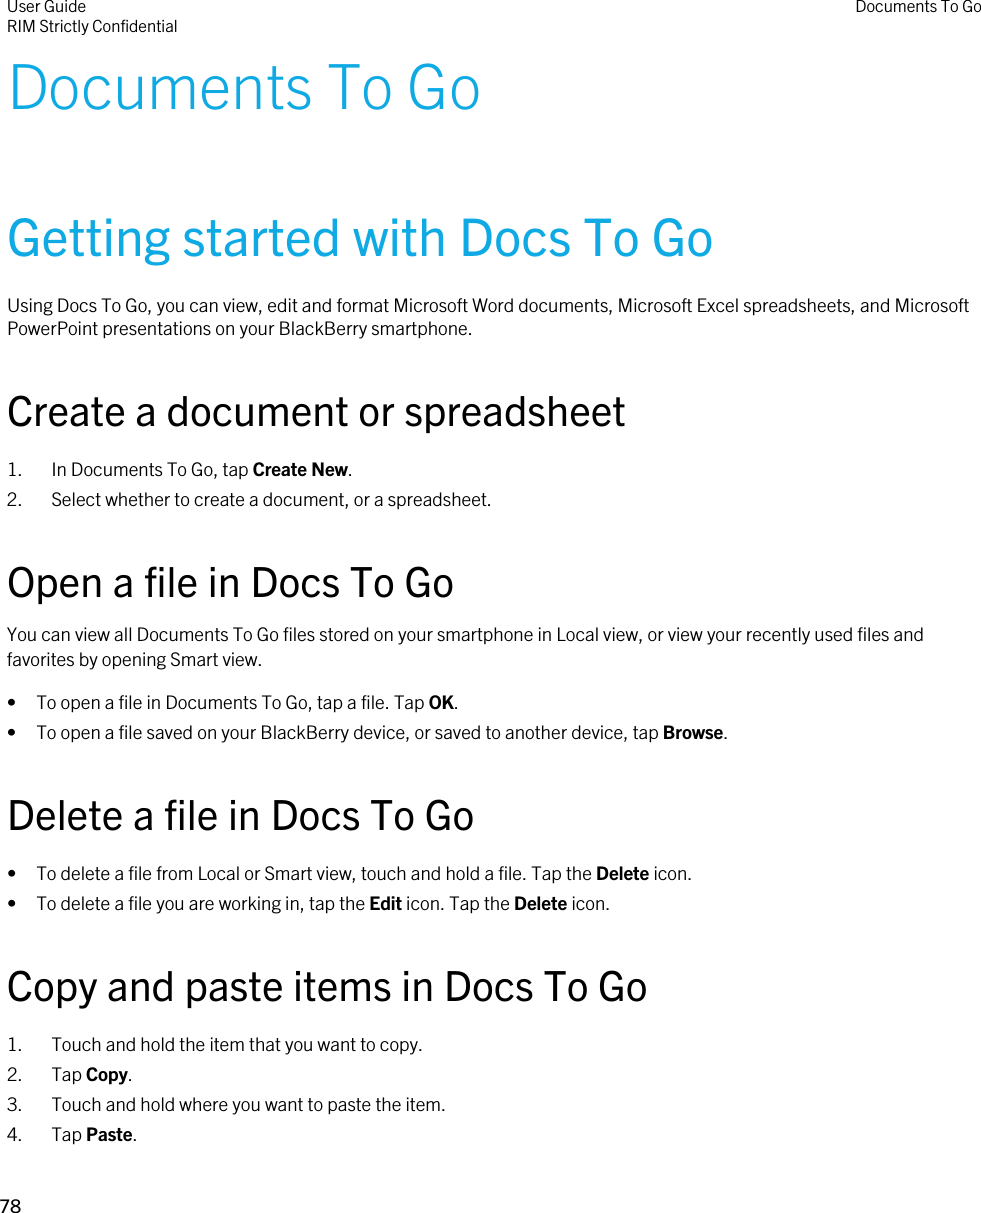 Documents To GoGetting started with Docs To GoUsing Docs To Go, you can view, edit and format Microsoft Word documents, Microsoft Excel spreadsheets, and Microsoft PowerPoint presentations on your BlackBerry smartphone.Create a document or spreadsheet1. In Documents To Go, tap Create New.2. Select whether to create a document, or a spreadsheet.Open a file in Docs To GoYou can view all Documents To Go files stored on your smartphone in Local view, or view your recently used files and favorites by opening Smart view.• To open a file in Documents To Go, tap a file. Tap OK.• To open a file saved on your BlackBerry device, or saved to another device, tap Browse.Delete a file in Docs To Go• To delete a file from Local or Smart view, touch and hold a file. Tap the Delete icon.• To delete a file you are working in, tap the Edit icon. Tap the Delete icon.Copy and paste items in Docs To Go1. Touch and hold the item that you want to copy.2. Tap Copy.3. Touch and hold where you want to paste the item.4. Tap Paste.User GuideRIM Strictly ConfidentialDocuments To Go78 